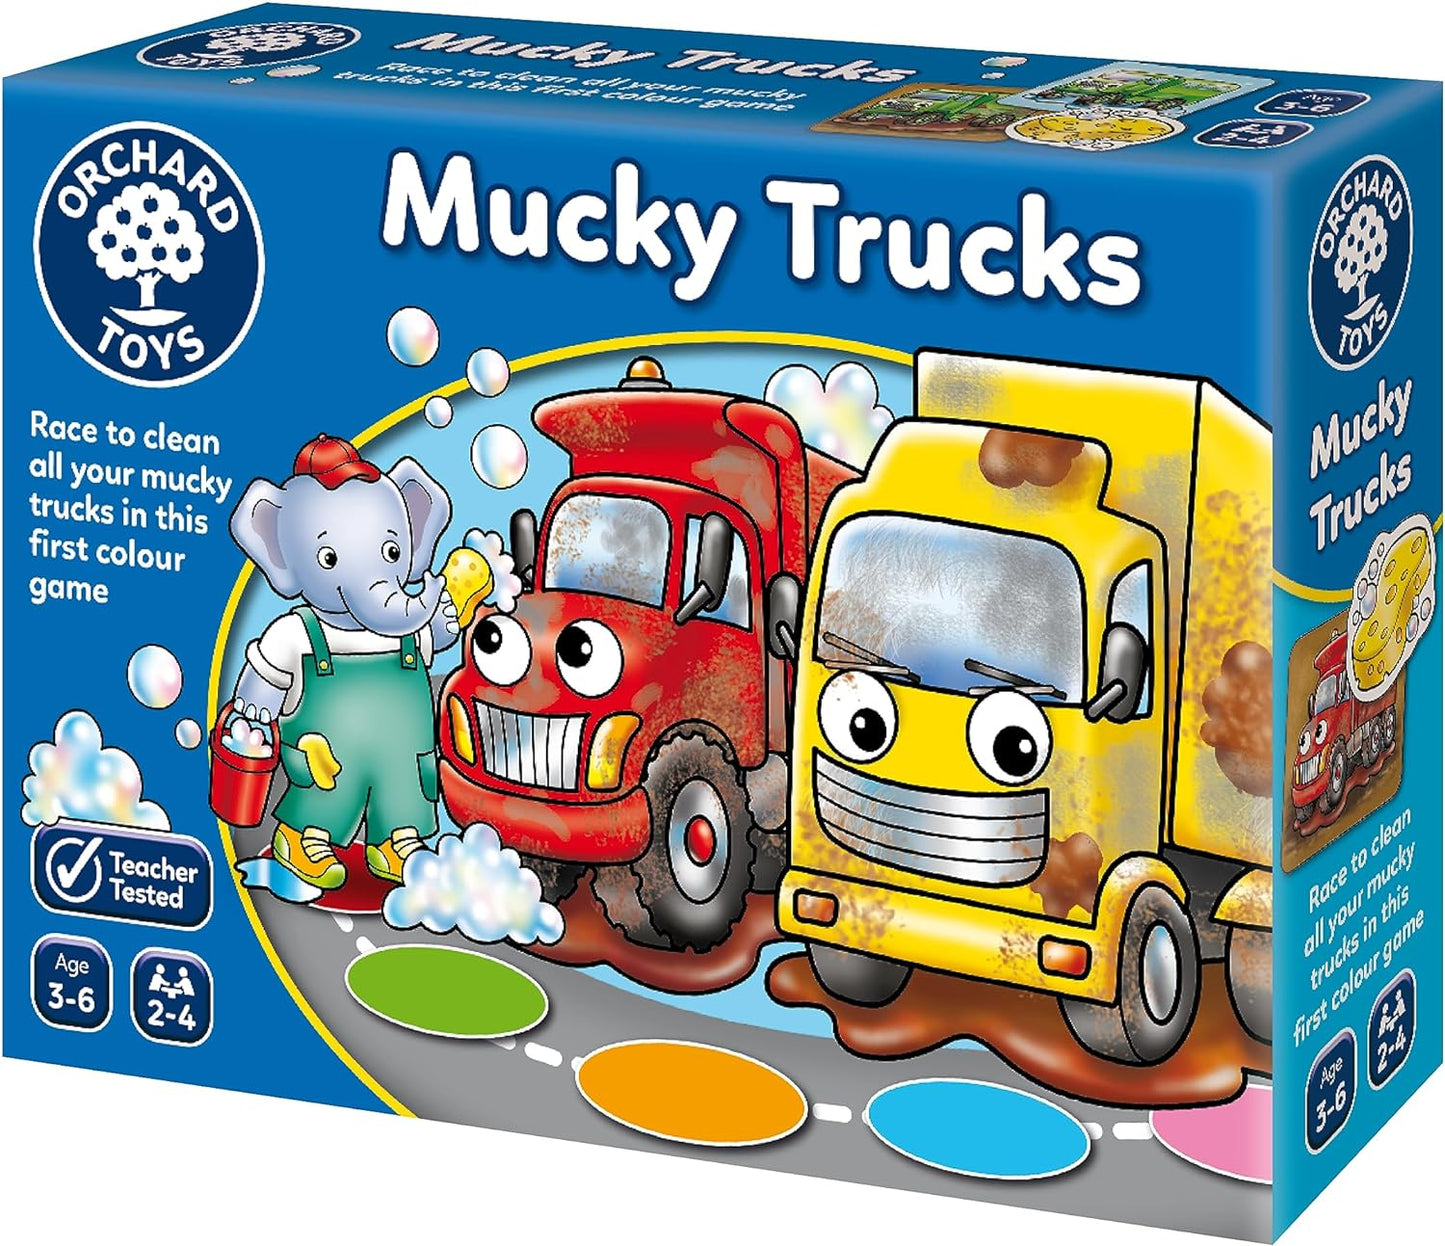 Orchard Toys Mucky Trucks Game Orchard Toys